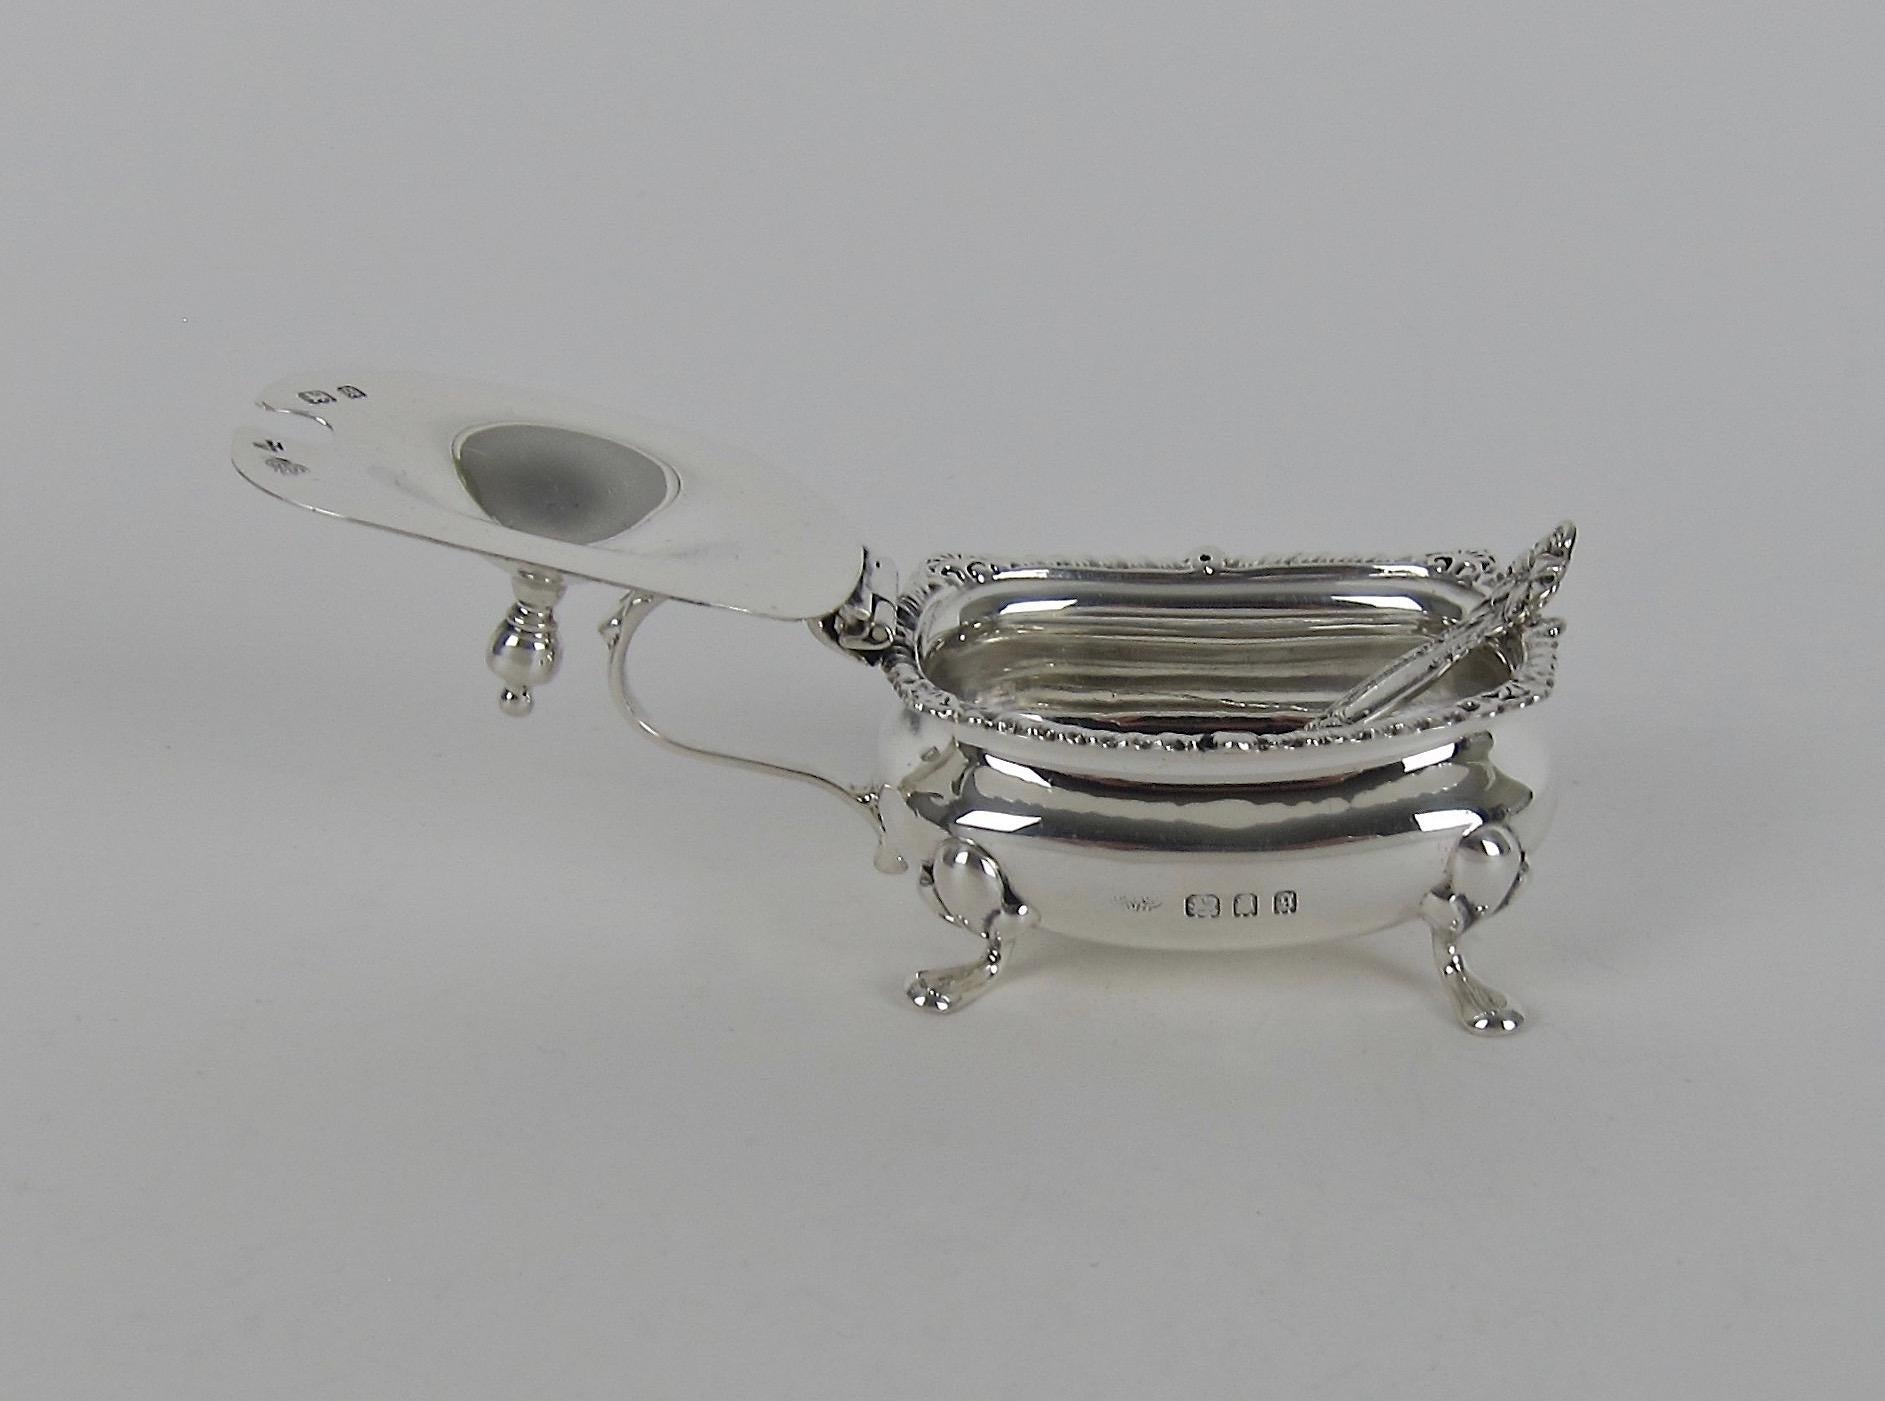 Antique Sterling Silver Mustard Pots from the Goldsmiths & Silversmiths Co Ltd 1